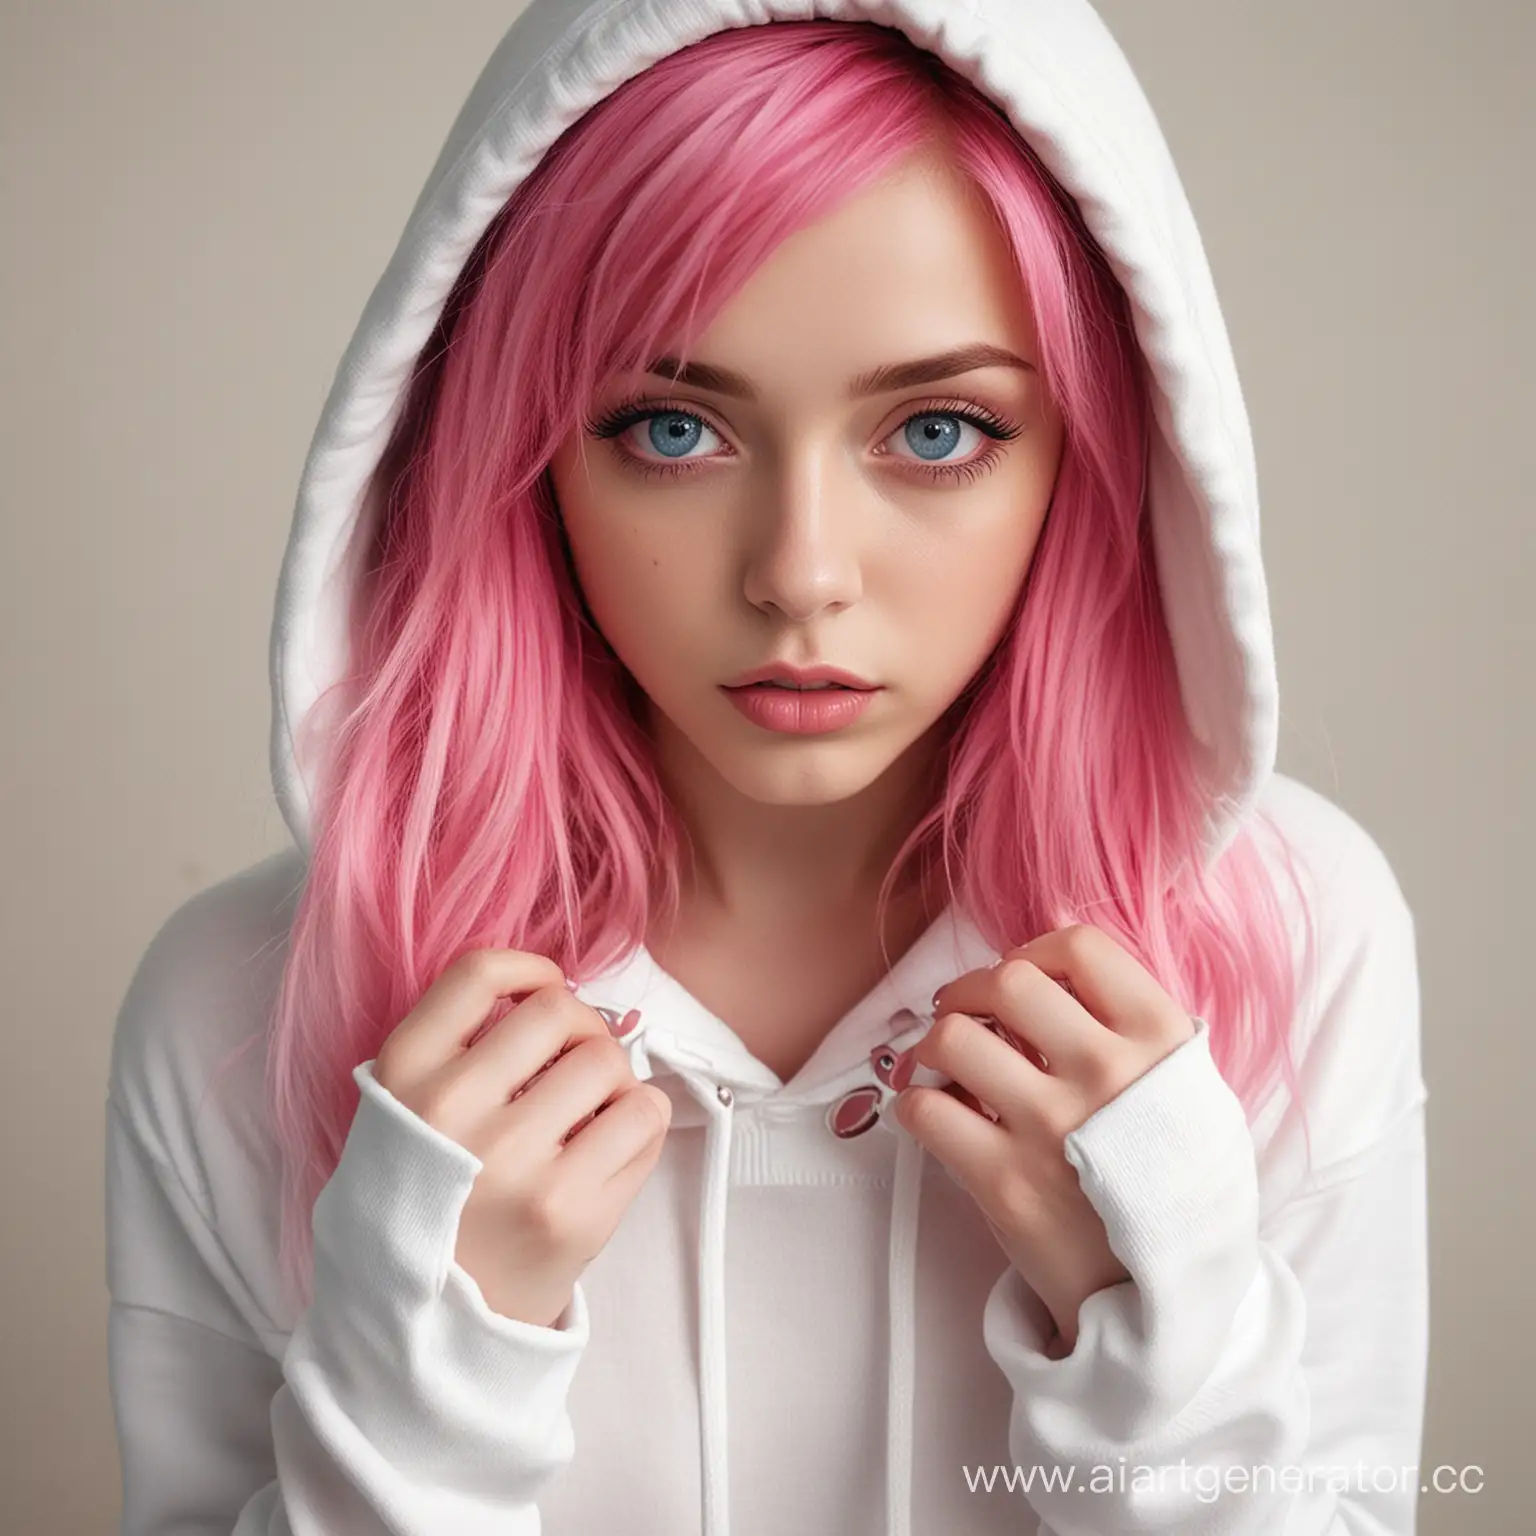 Shy-Dark-PinkHaired-Girl-in-HeartShaped-Hoodie-Delicate-Beauty-with-a-Hint-of-Mystery